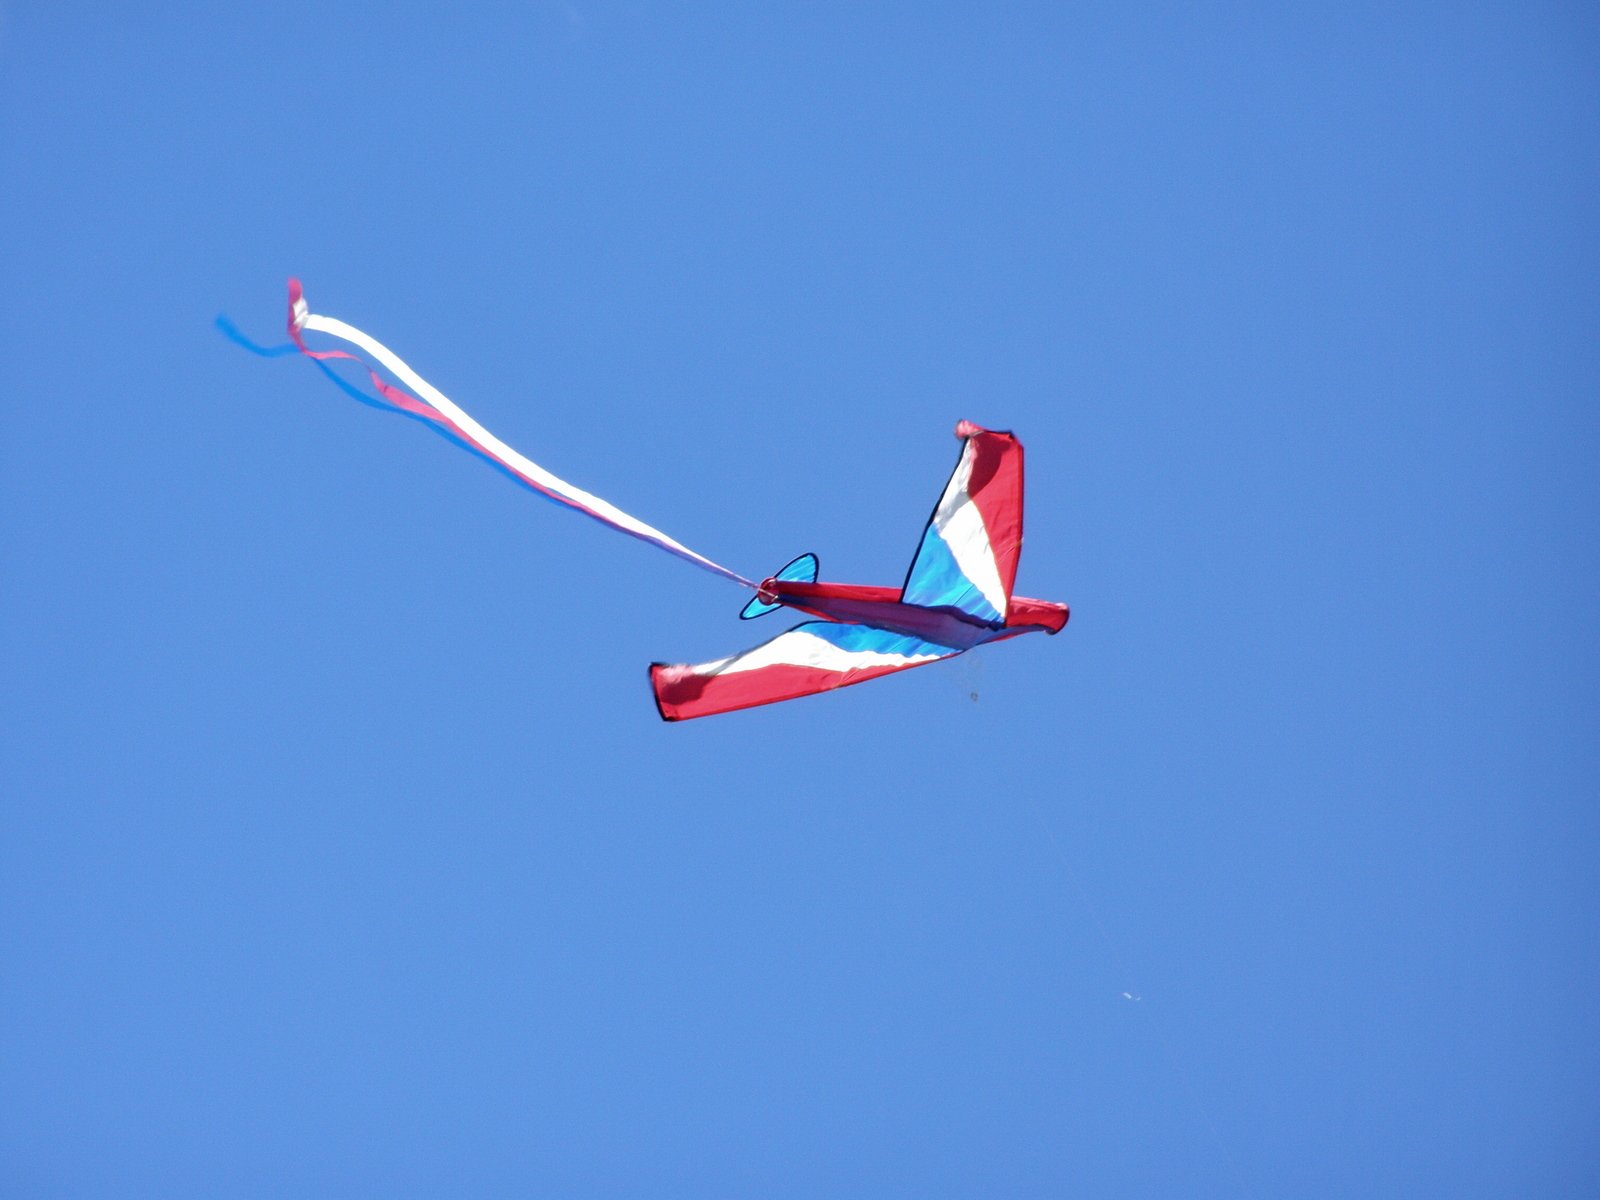 the kite is flying high in the blue sky